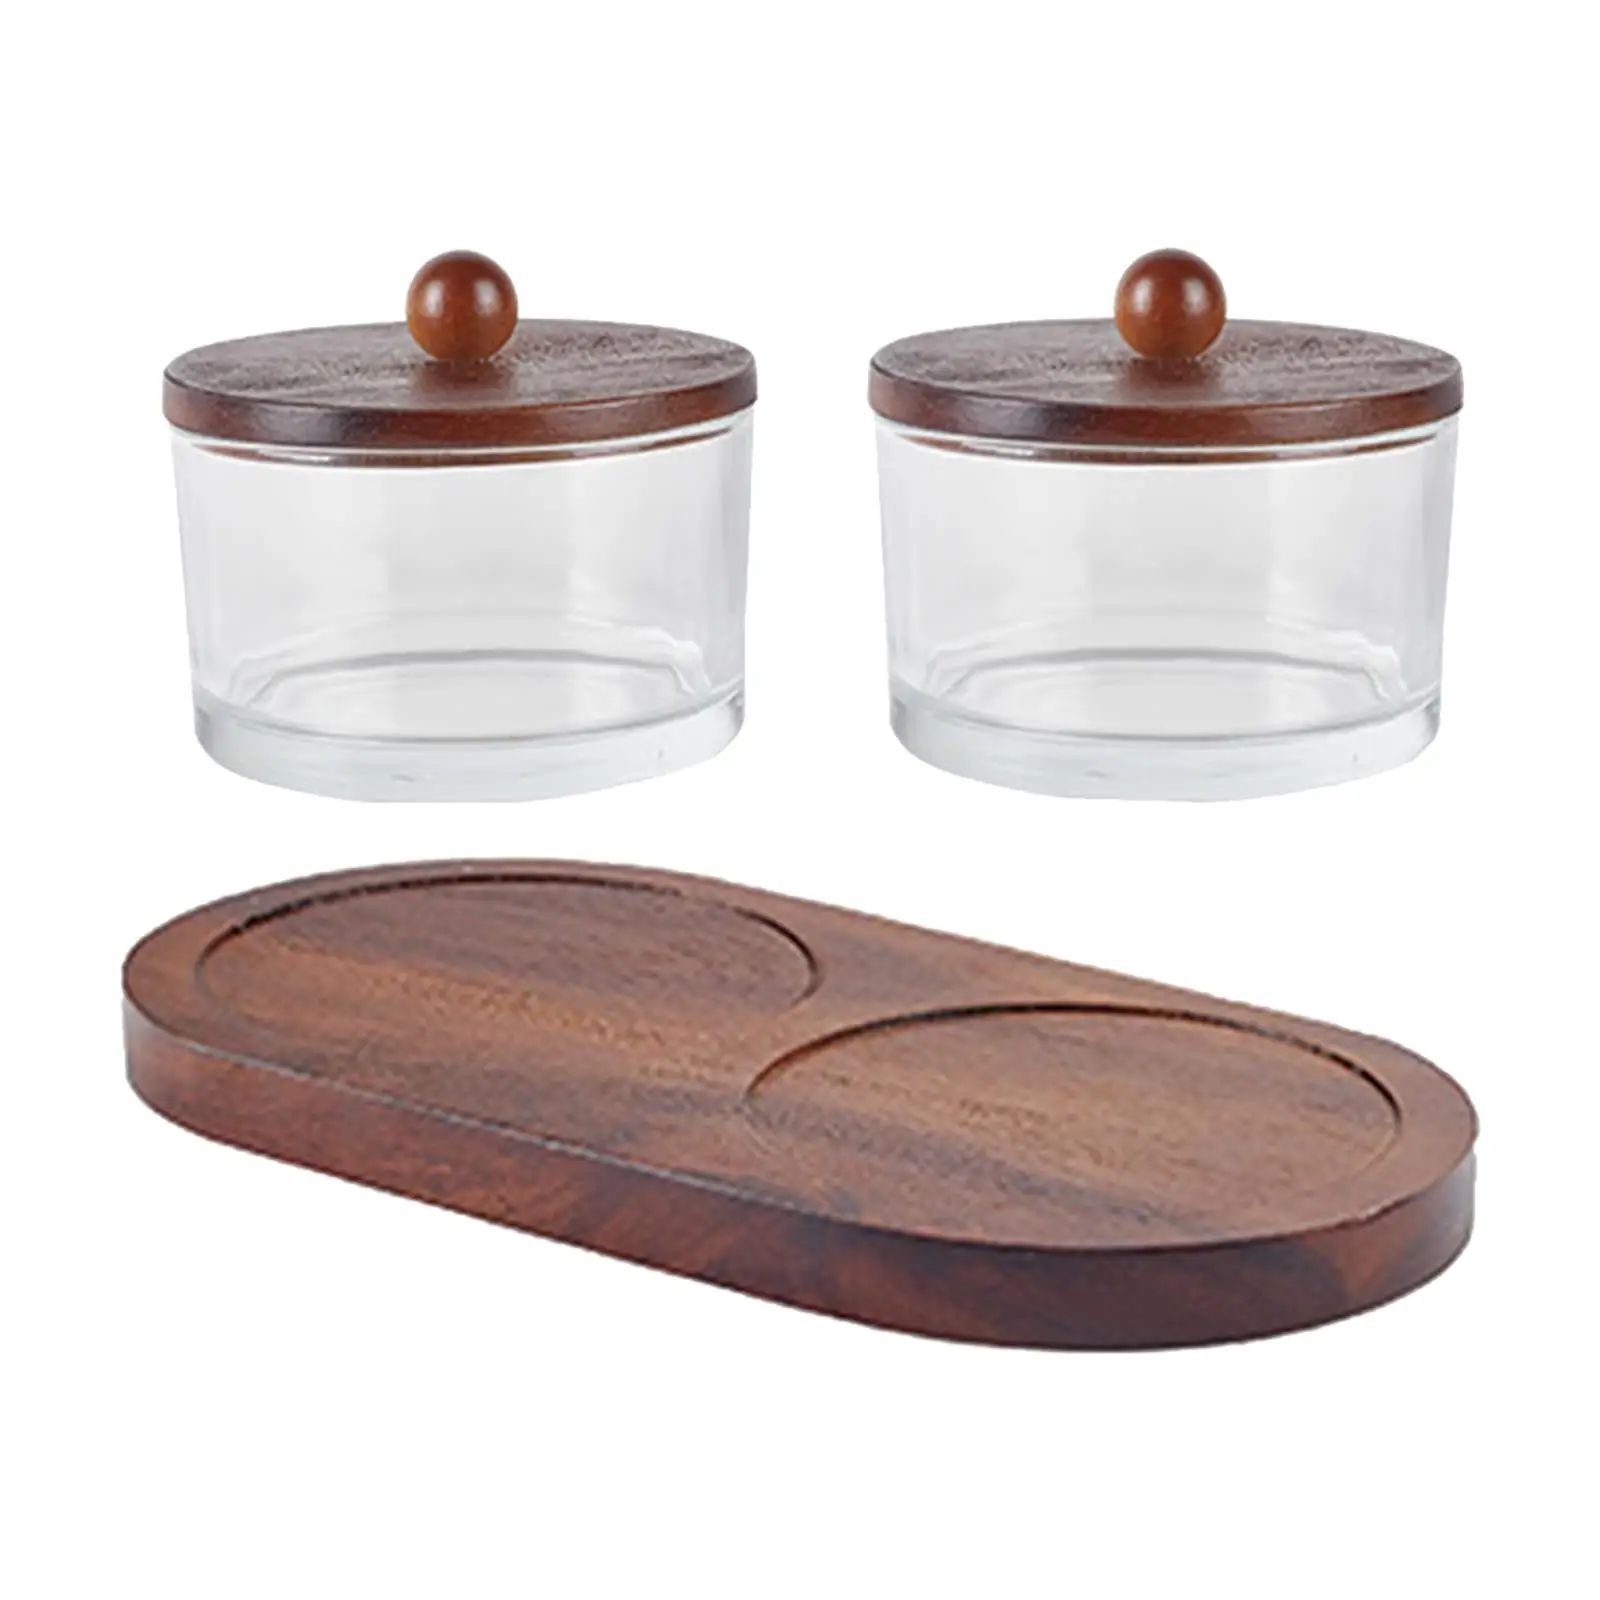 Bowl with Wooden Serving Tray Wooden Pallets with Lid Gift Transparent Wooden Serving Tray with Bowl for Appetizers Sala Fruit